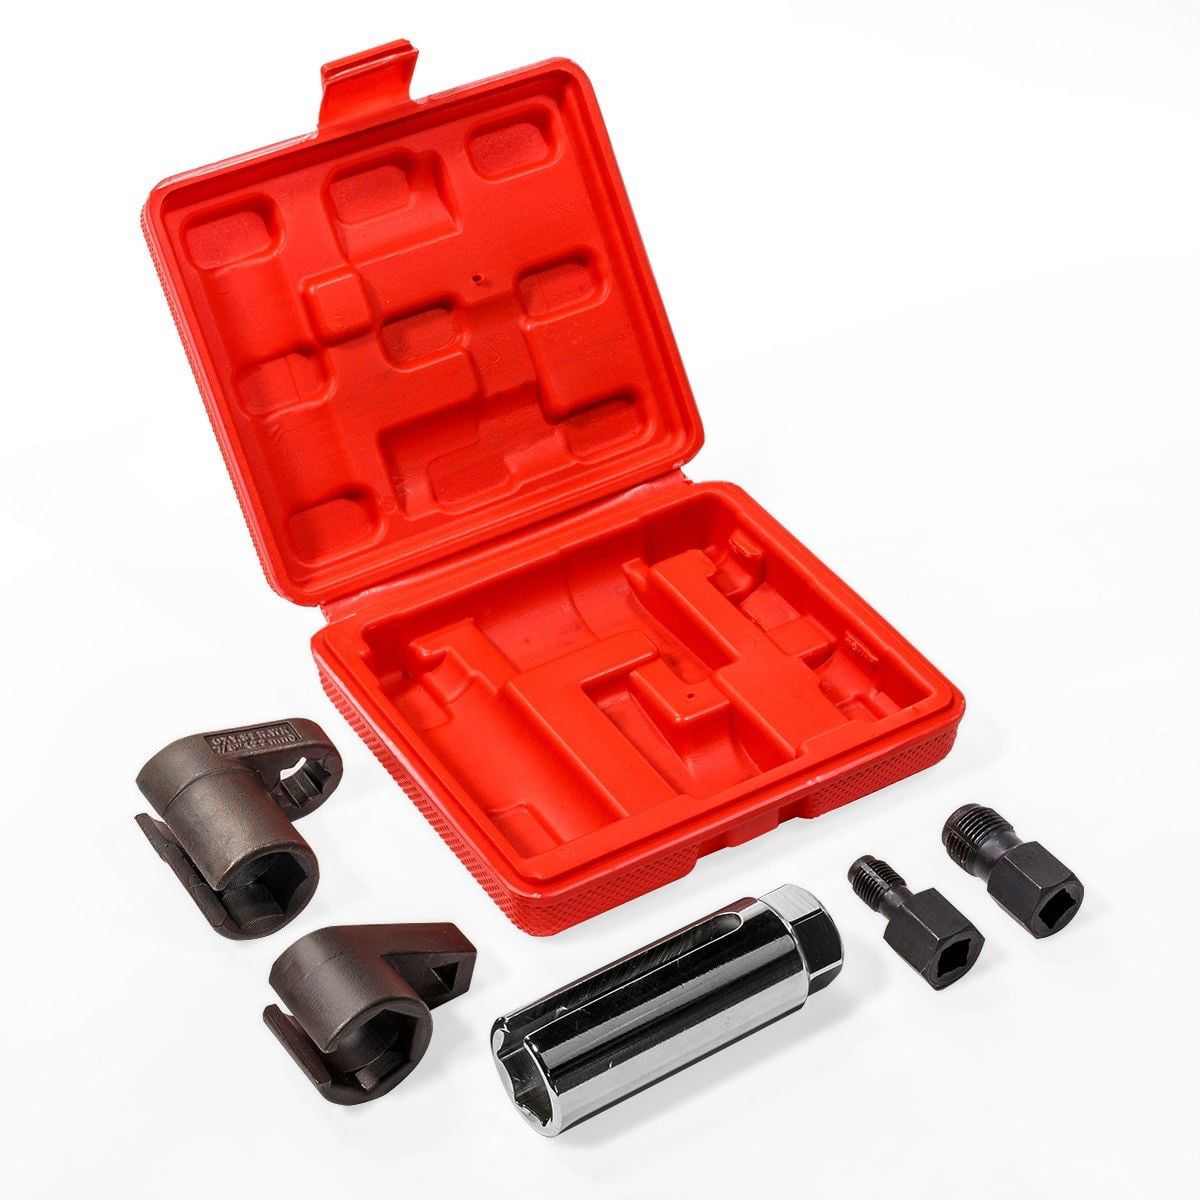 Oxygen Sensor Socket Offset Wrench Remover Tool and Thread Chaser Set 5 PCS set A ABIGAIL 